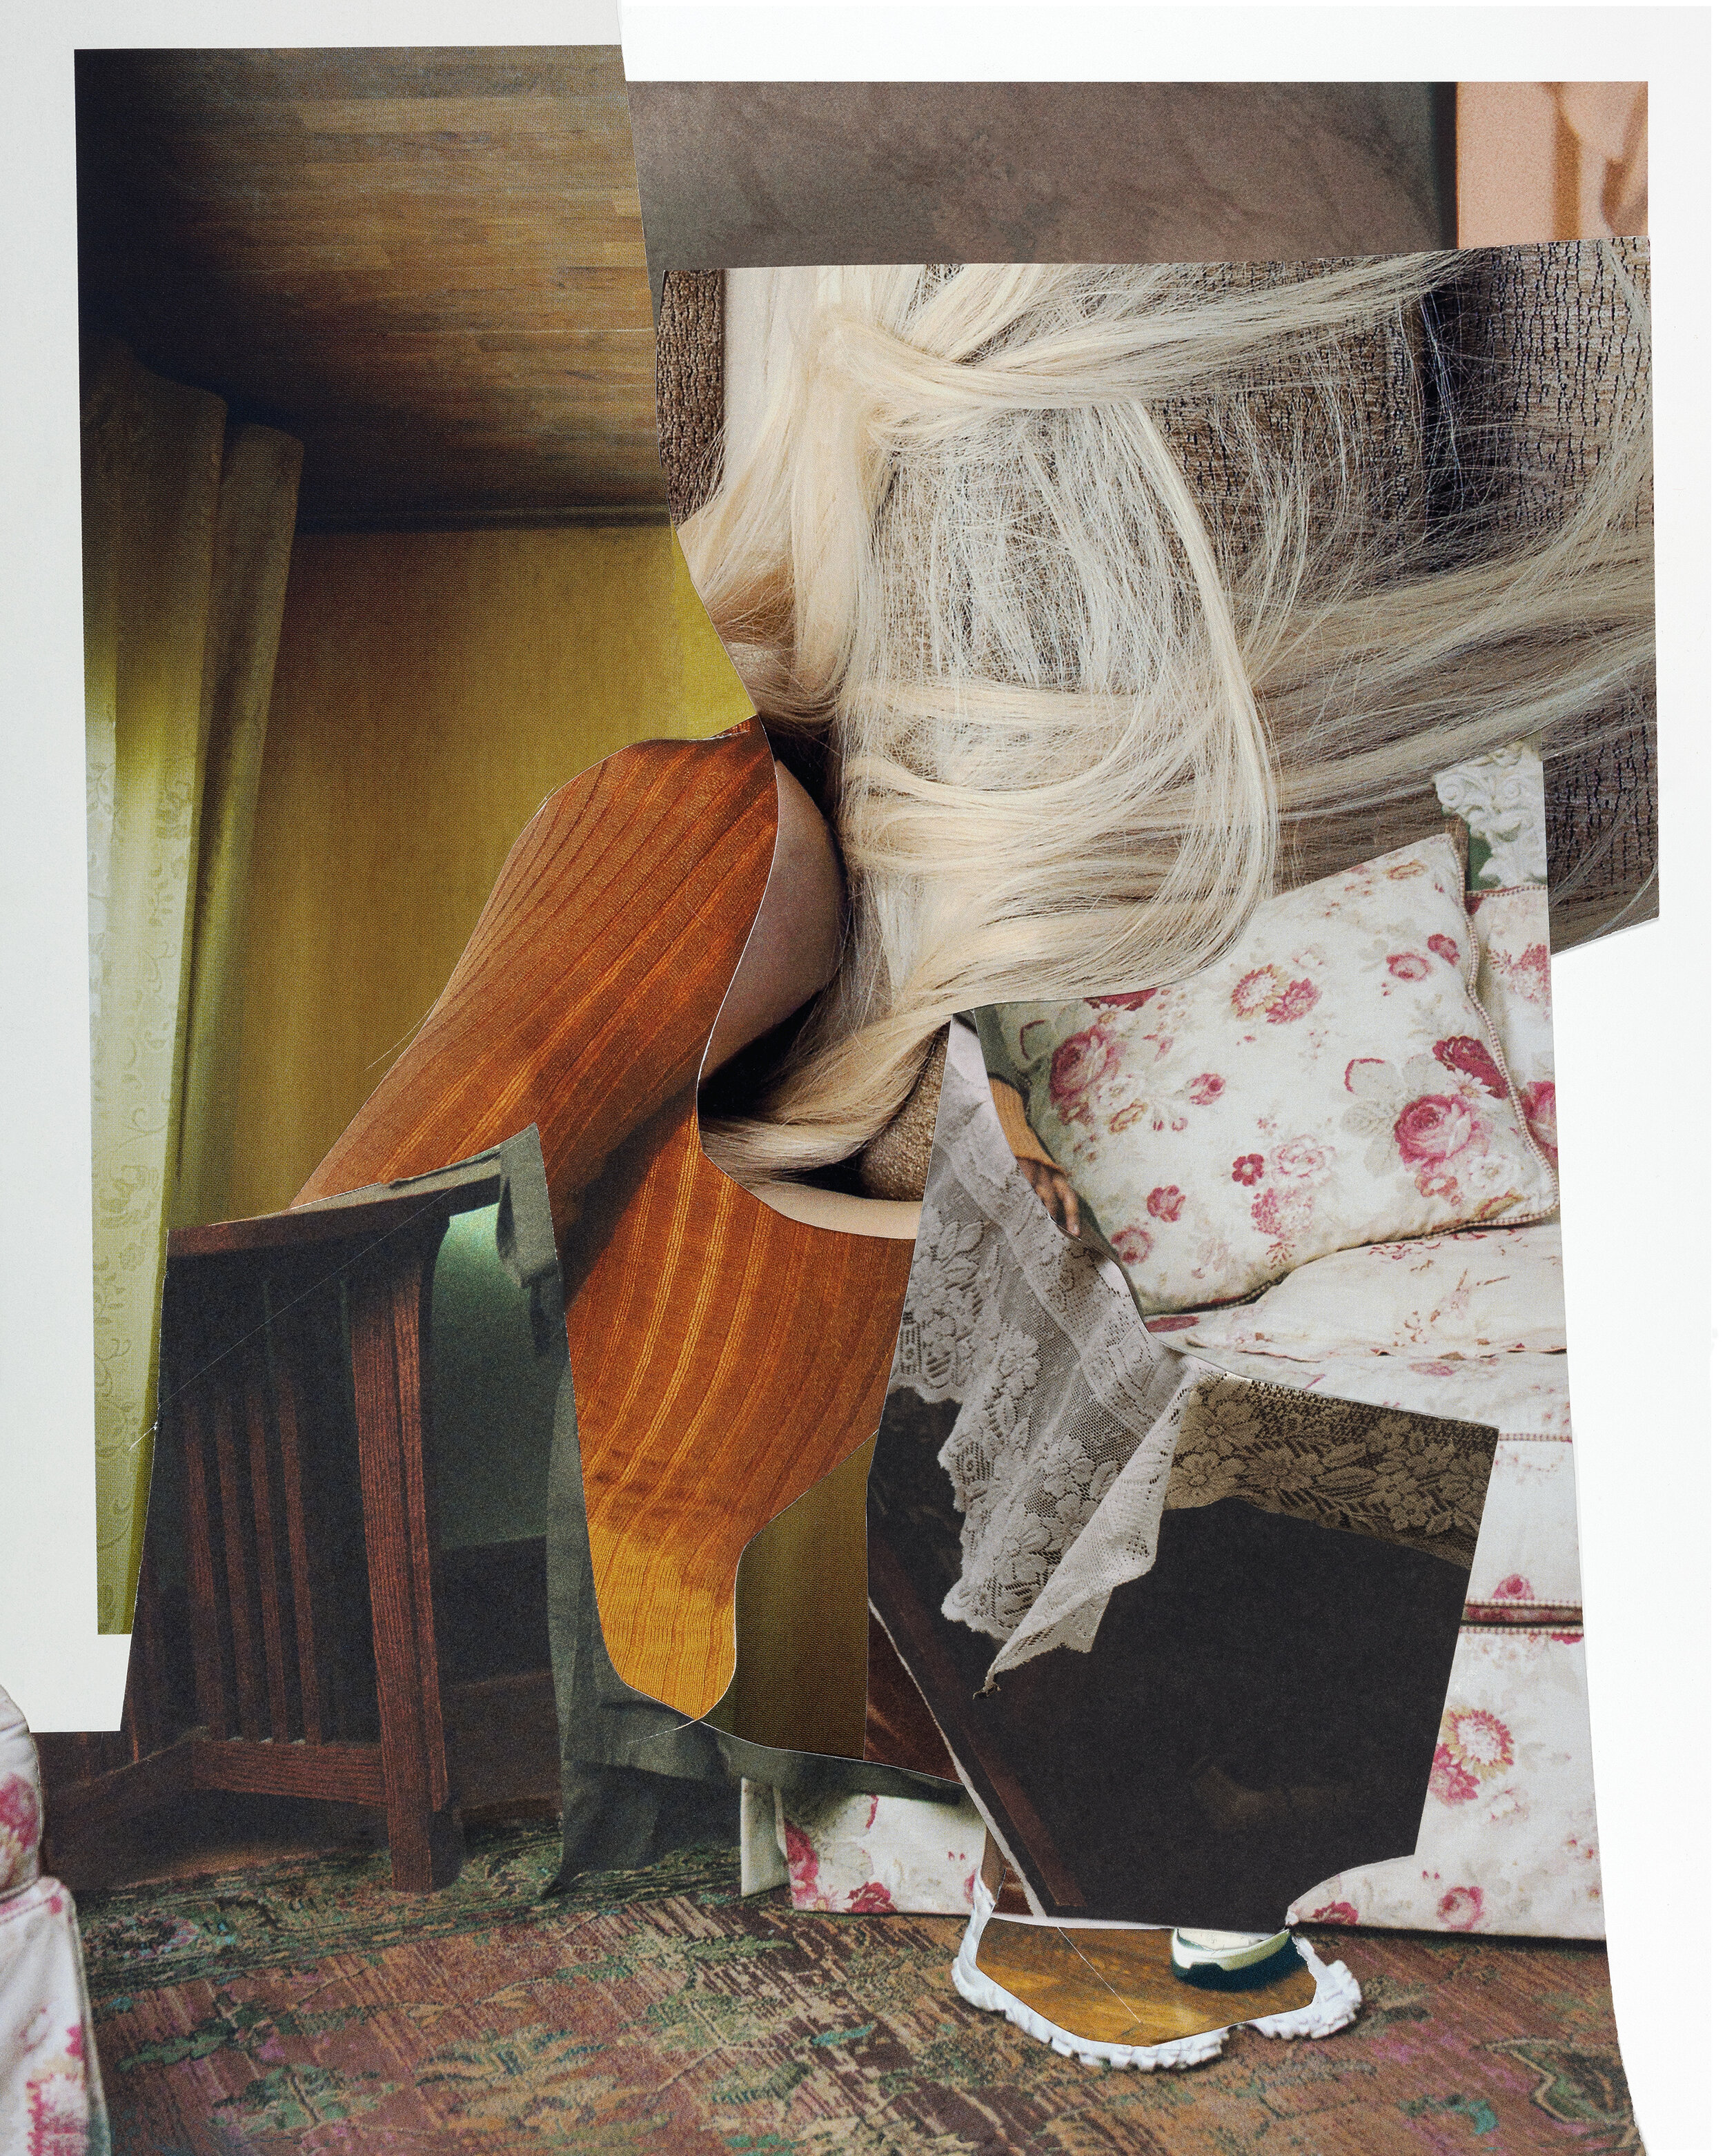 Blond Hair with Cushion_24 x 30 cm_UK_2019_K Young Collage.jpg